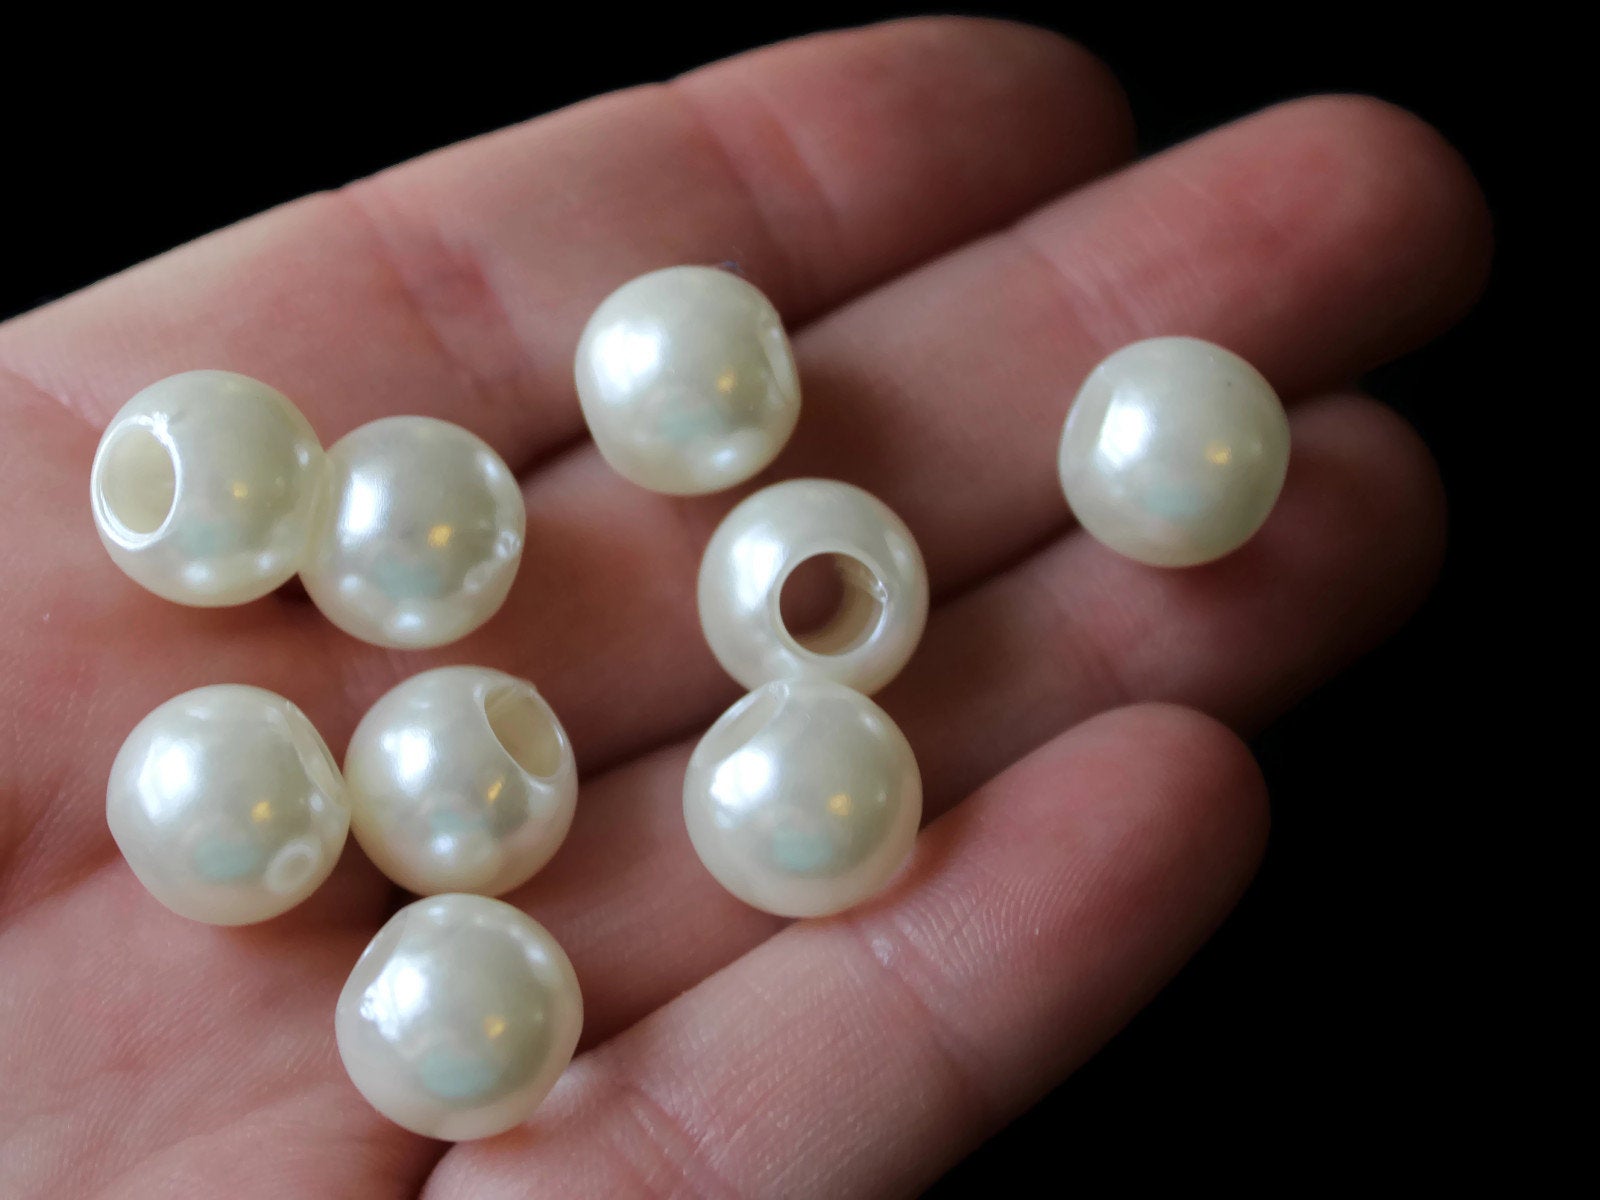 40 12mm Large Hole Pearls Round Ivory White Pearl Beads by Smileyboy | Michaels